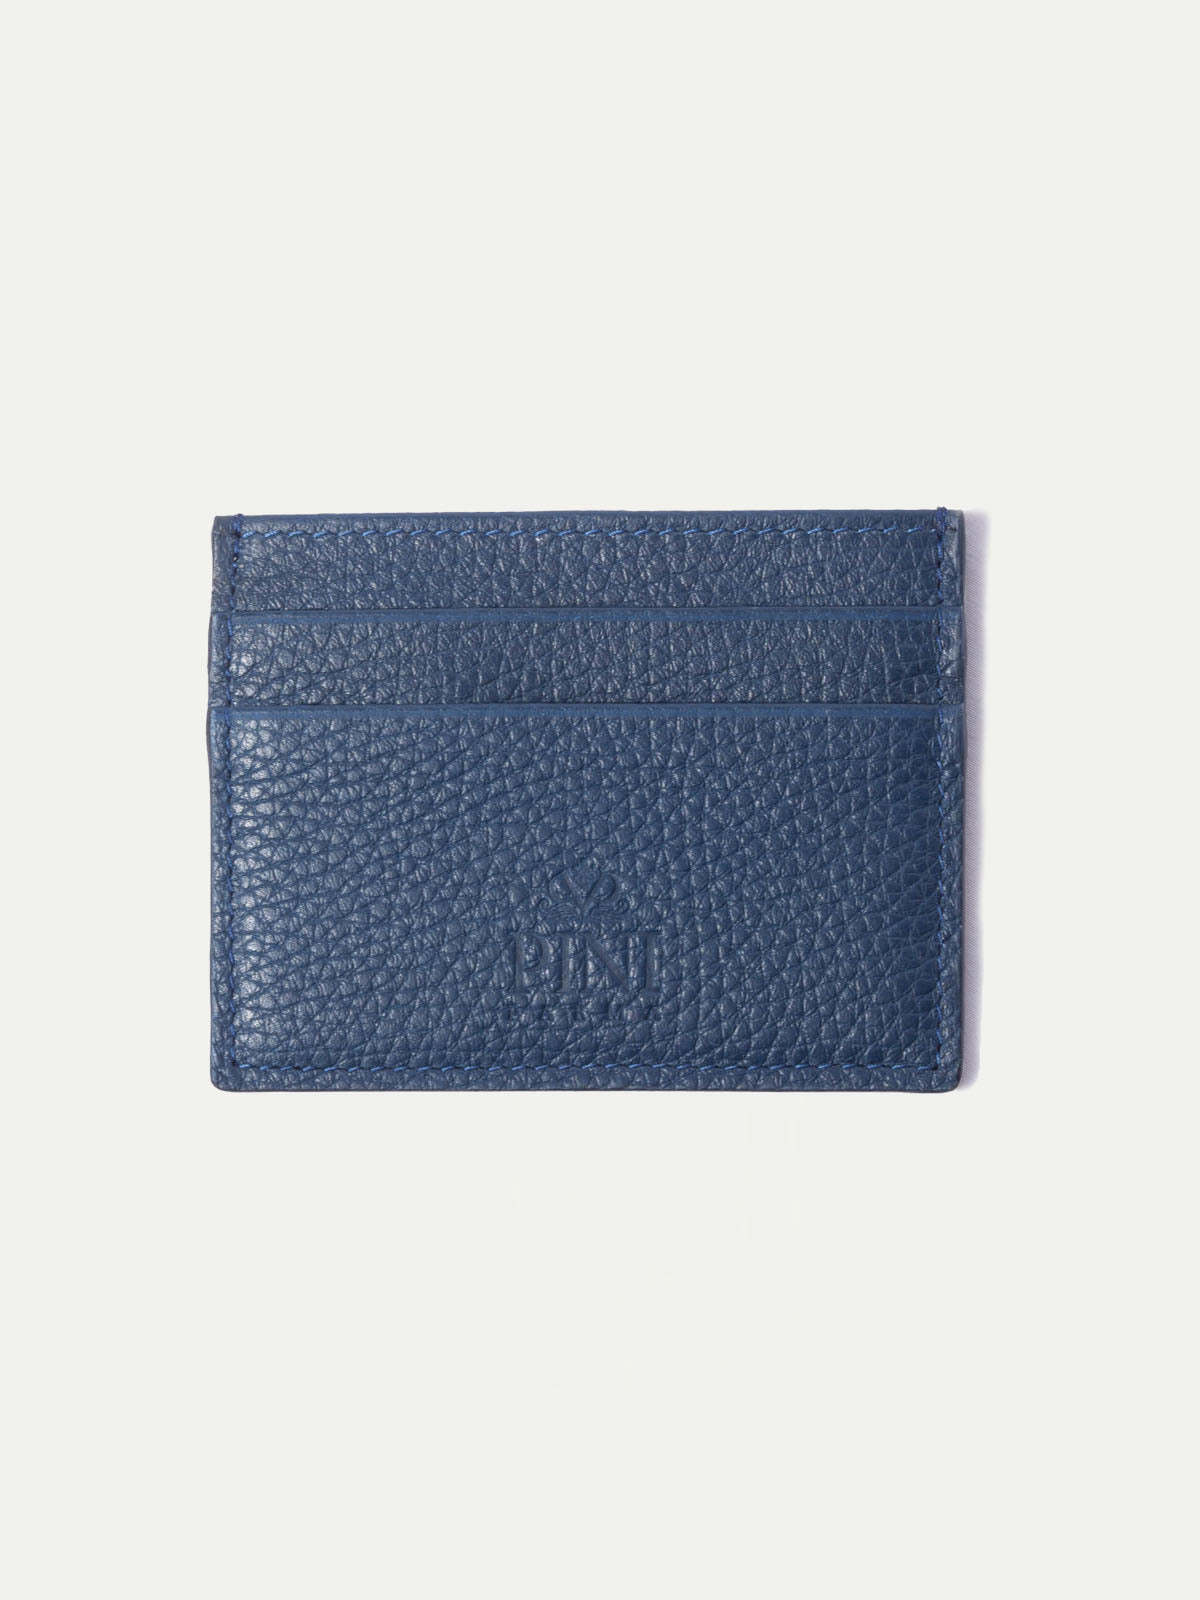 Blue leather card holder - Made in Italy